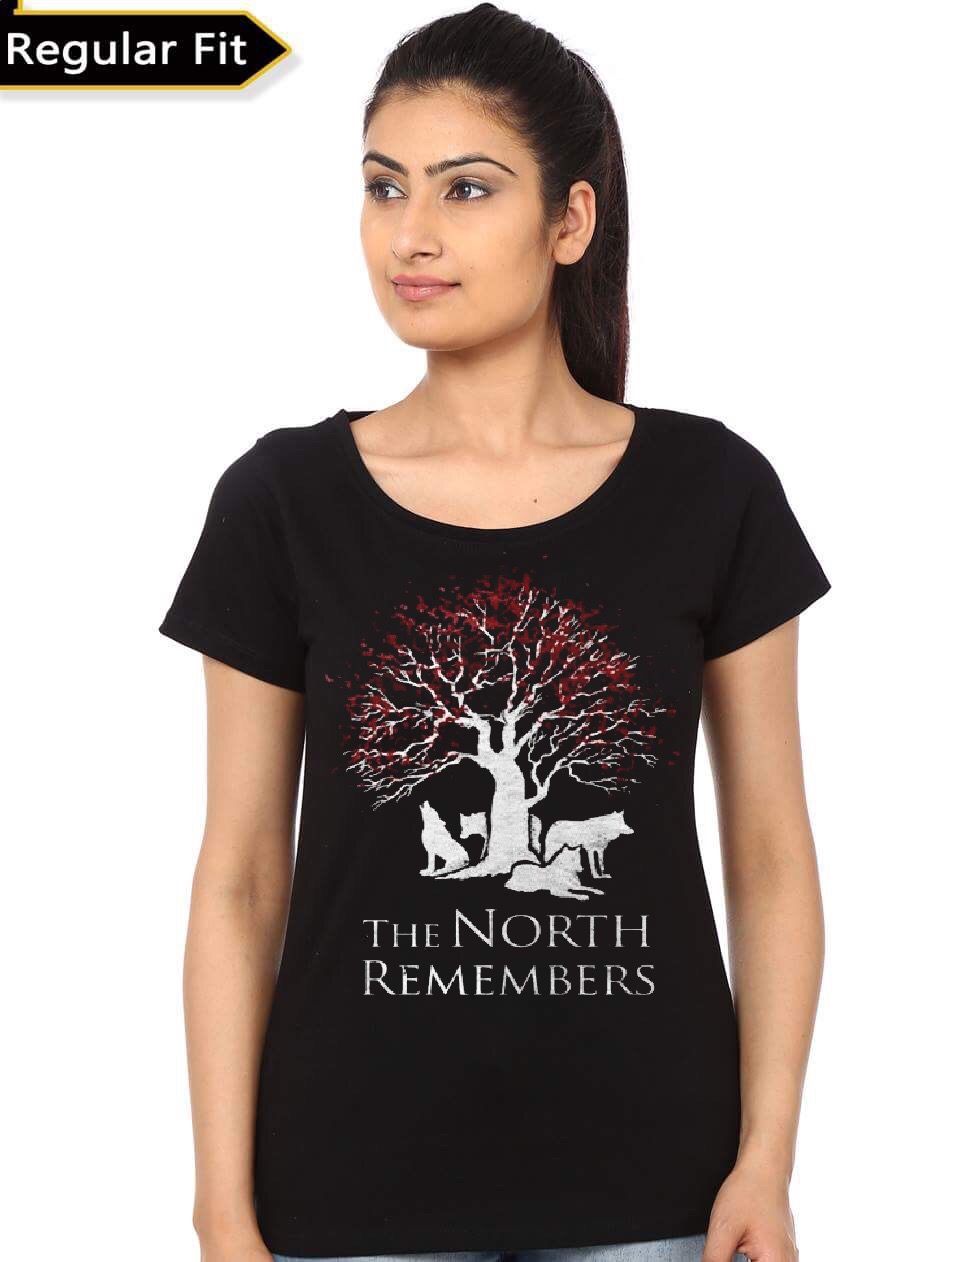 the north remembers shirt womens